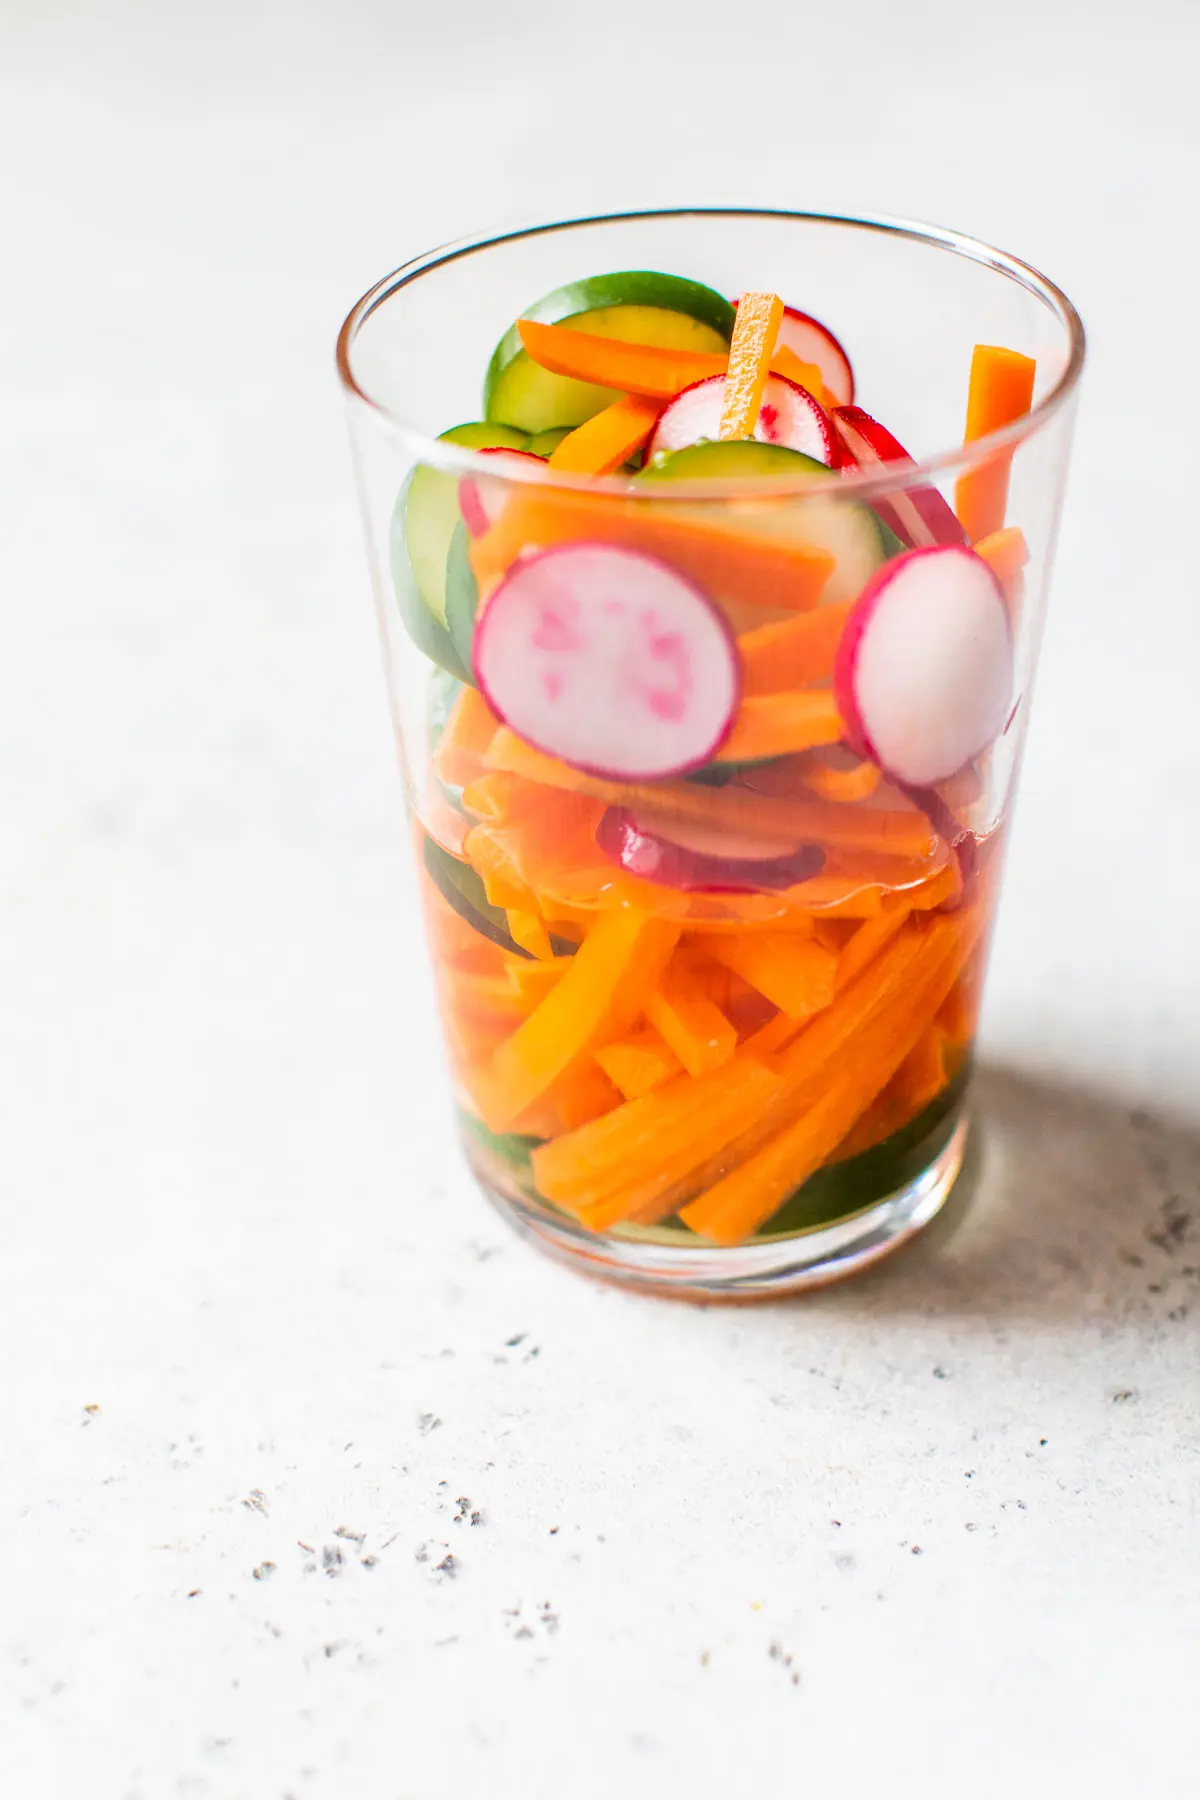 sliced vegetables in a cup with vinegar